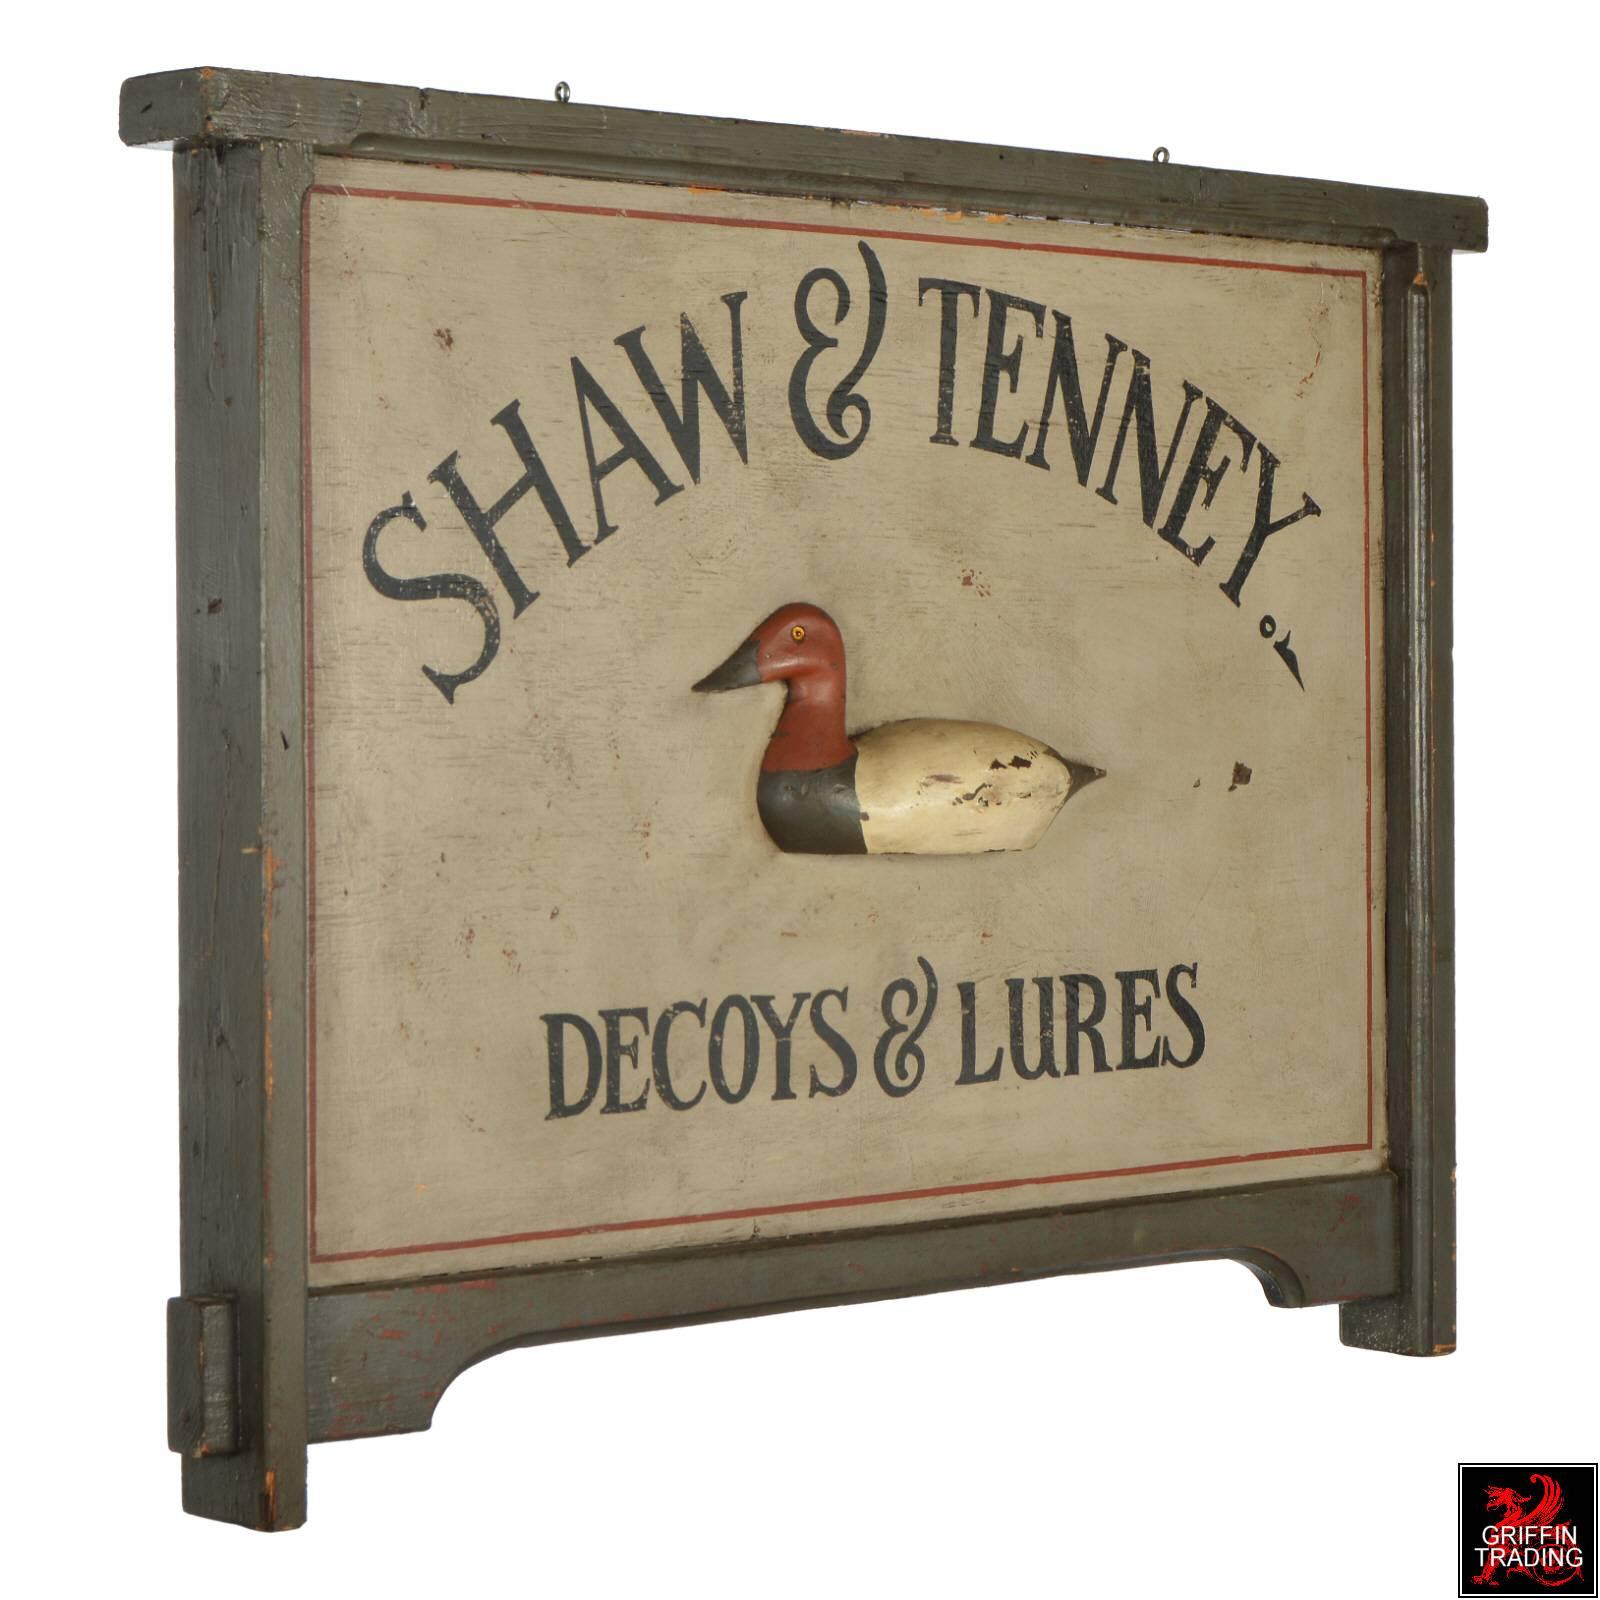 American Shaw and Tenney Decoys and Lures Trade Sign For Sale